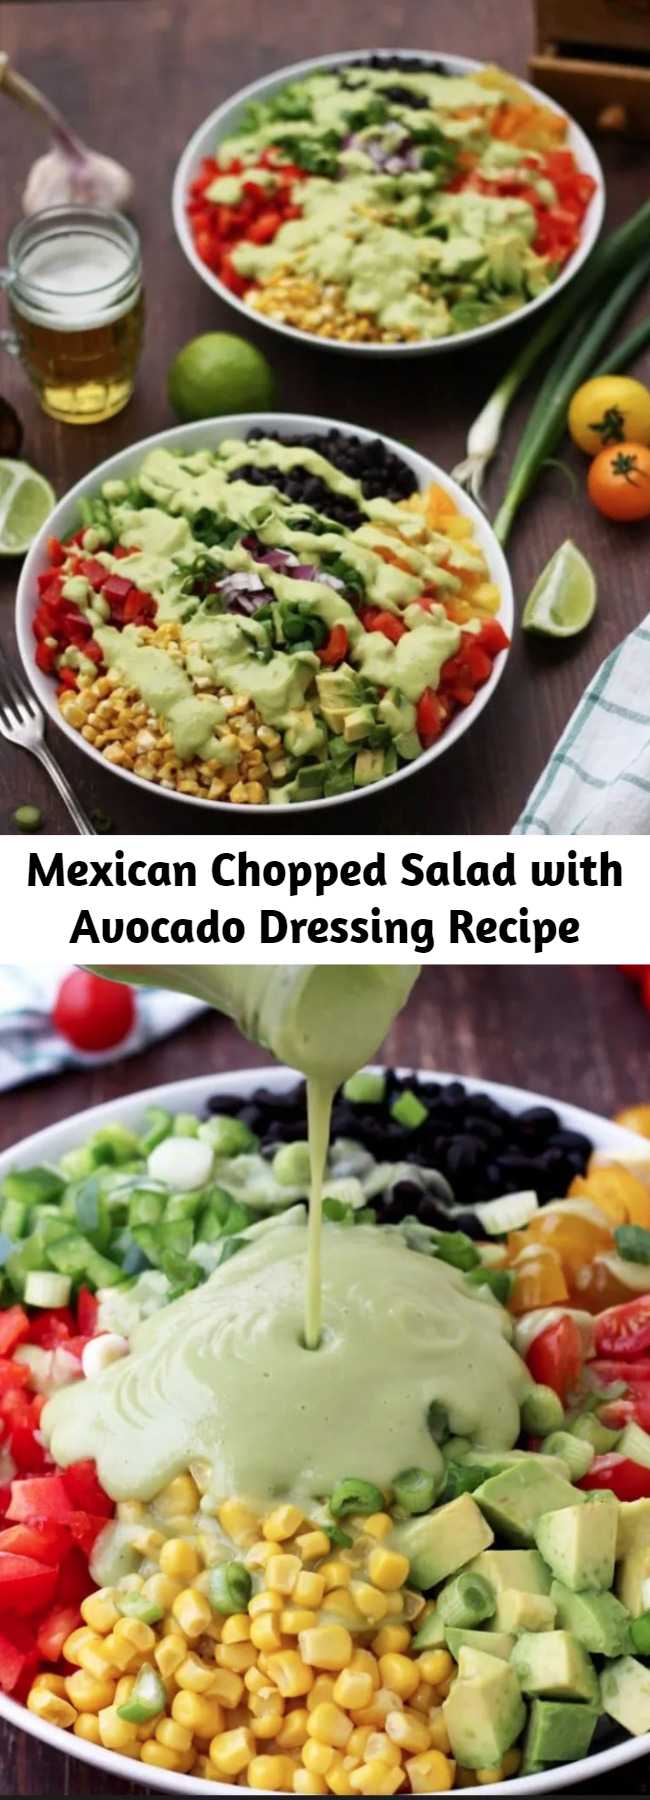 Mexican Chopped Salad with Avocado Dressing Recipe - Delicious vegan Mexican chopped salad with avocado dressing makes the perfect lunch salad or an easy side dish to any Mexican feast. This gluten free salad is packed with fresh veggies, dietary fiber and plant based protein.